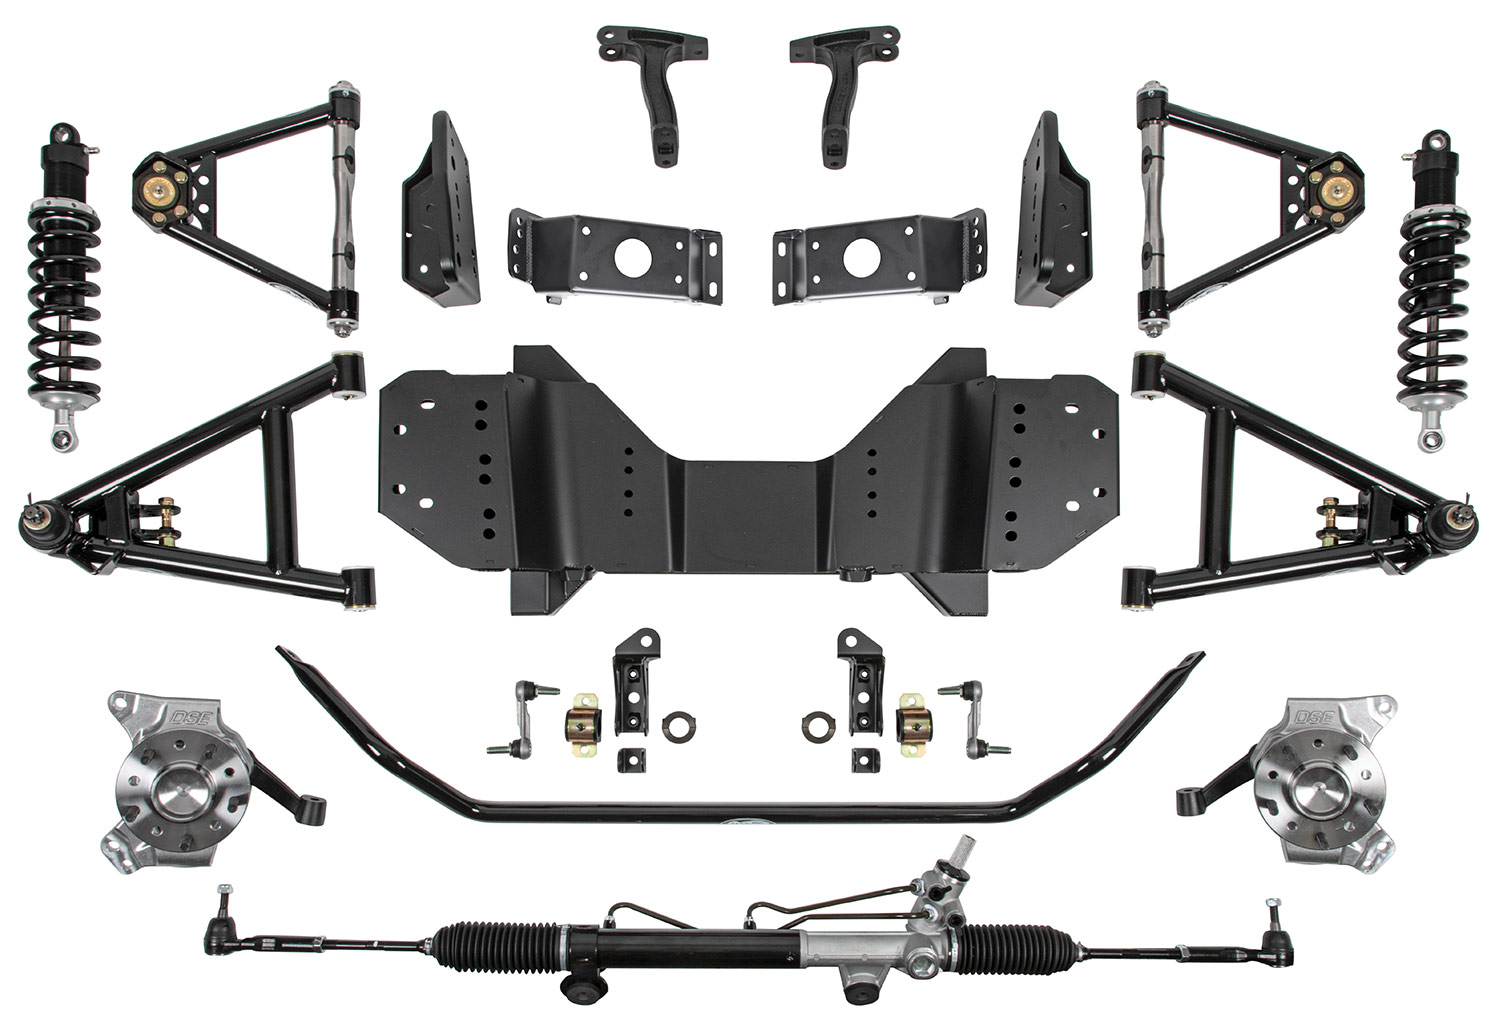 new crossmember mounts tubular A-arms, coilovers, and rack-and-pinion steering evenly laird out in the respective places